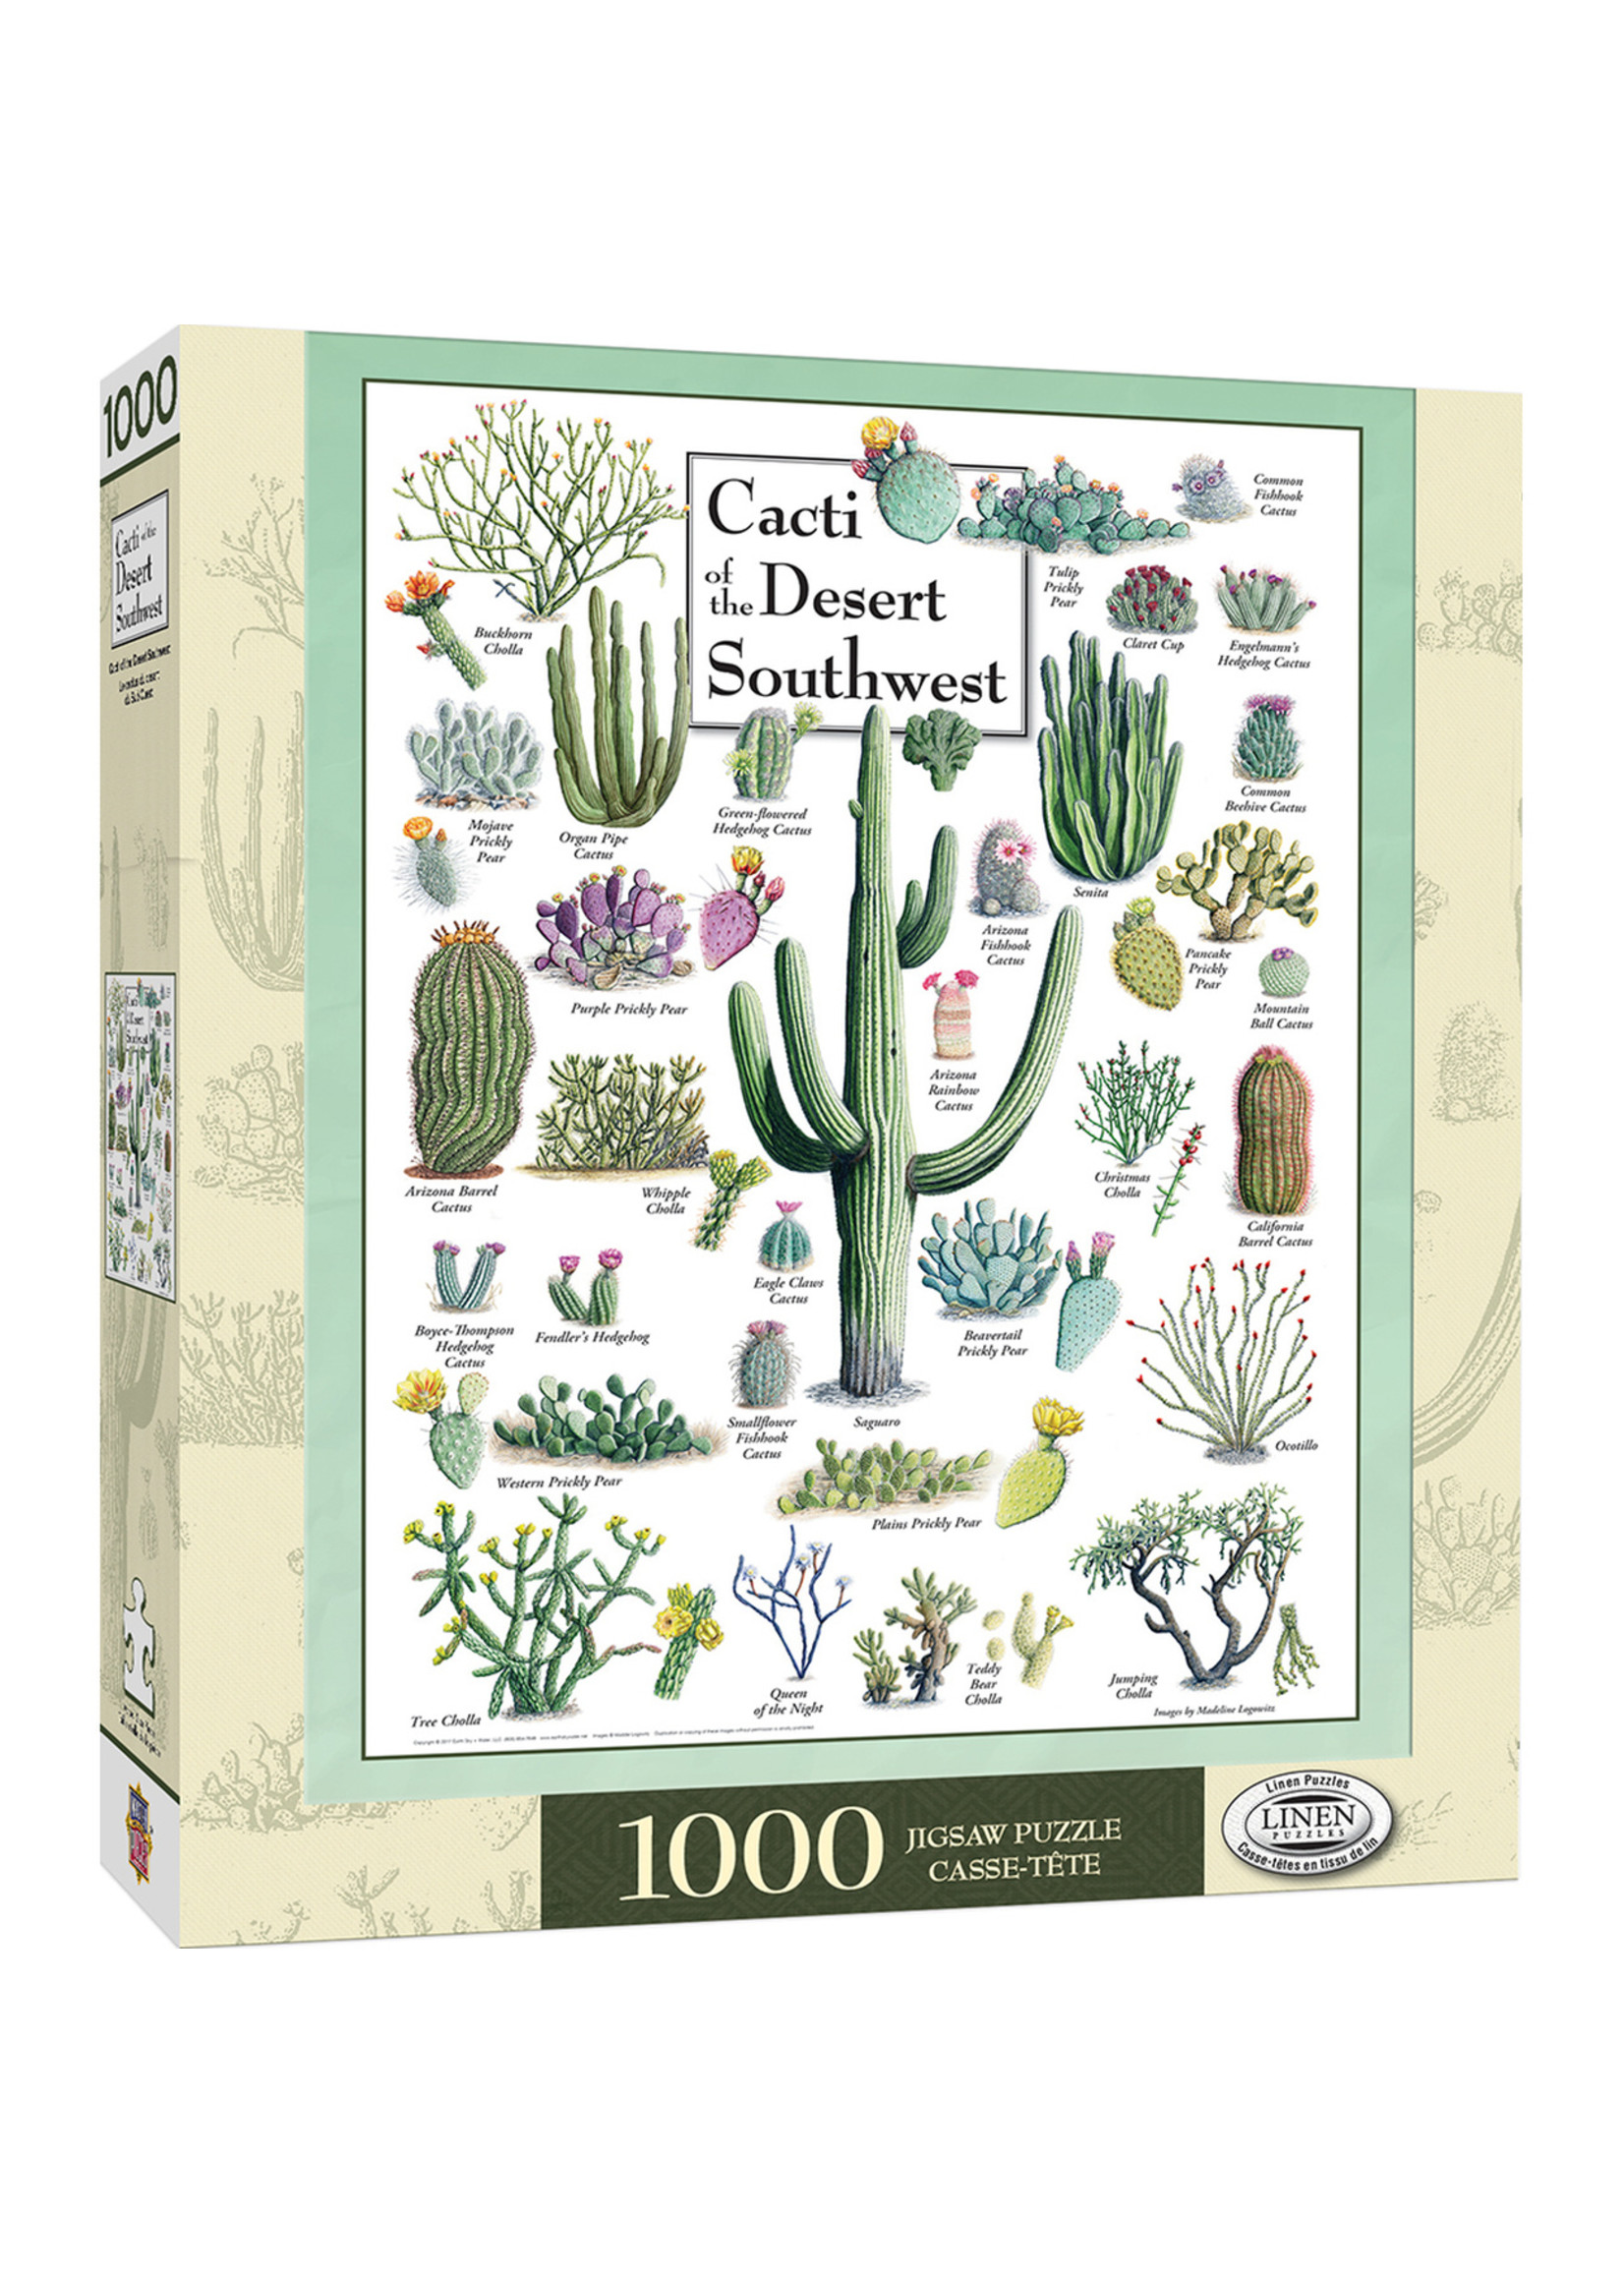 Masterpieces Puzzle Company "Field Guide: Cacti of the Desert Southwest" 1000 Piece Puzzle